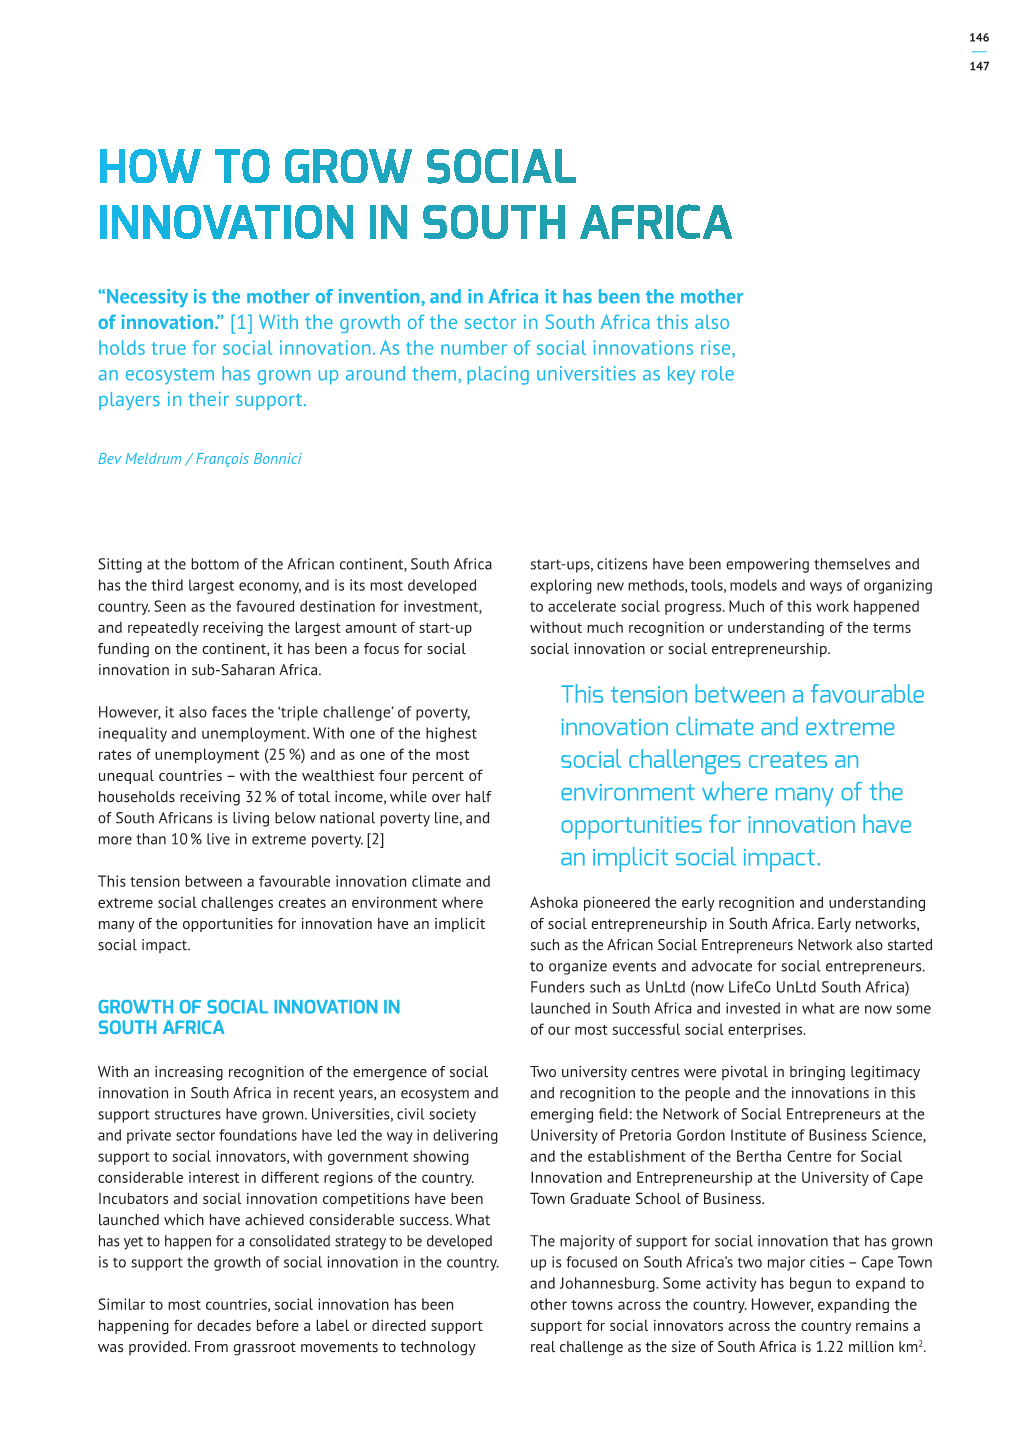 How to Grow Social Innovation in South Africa